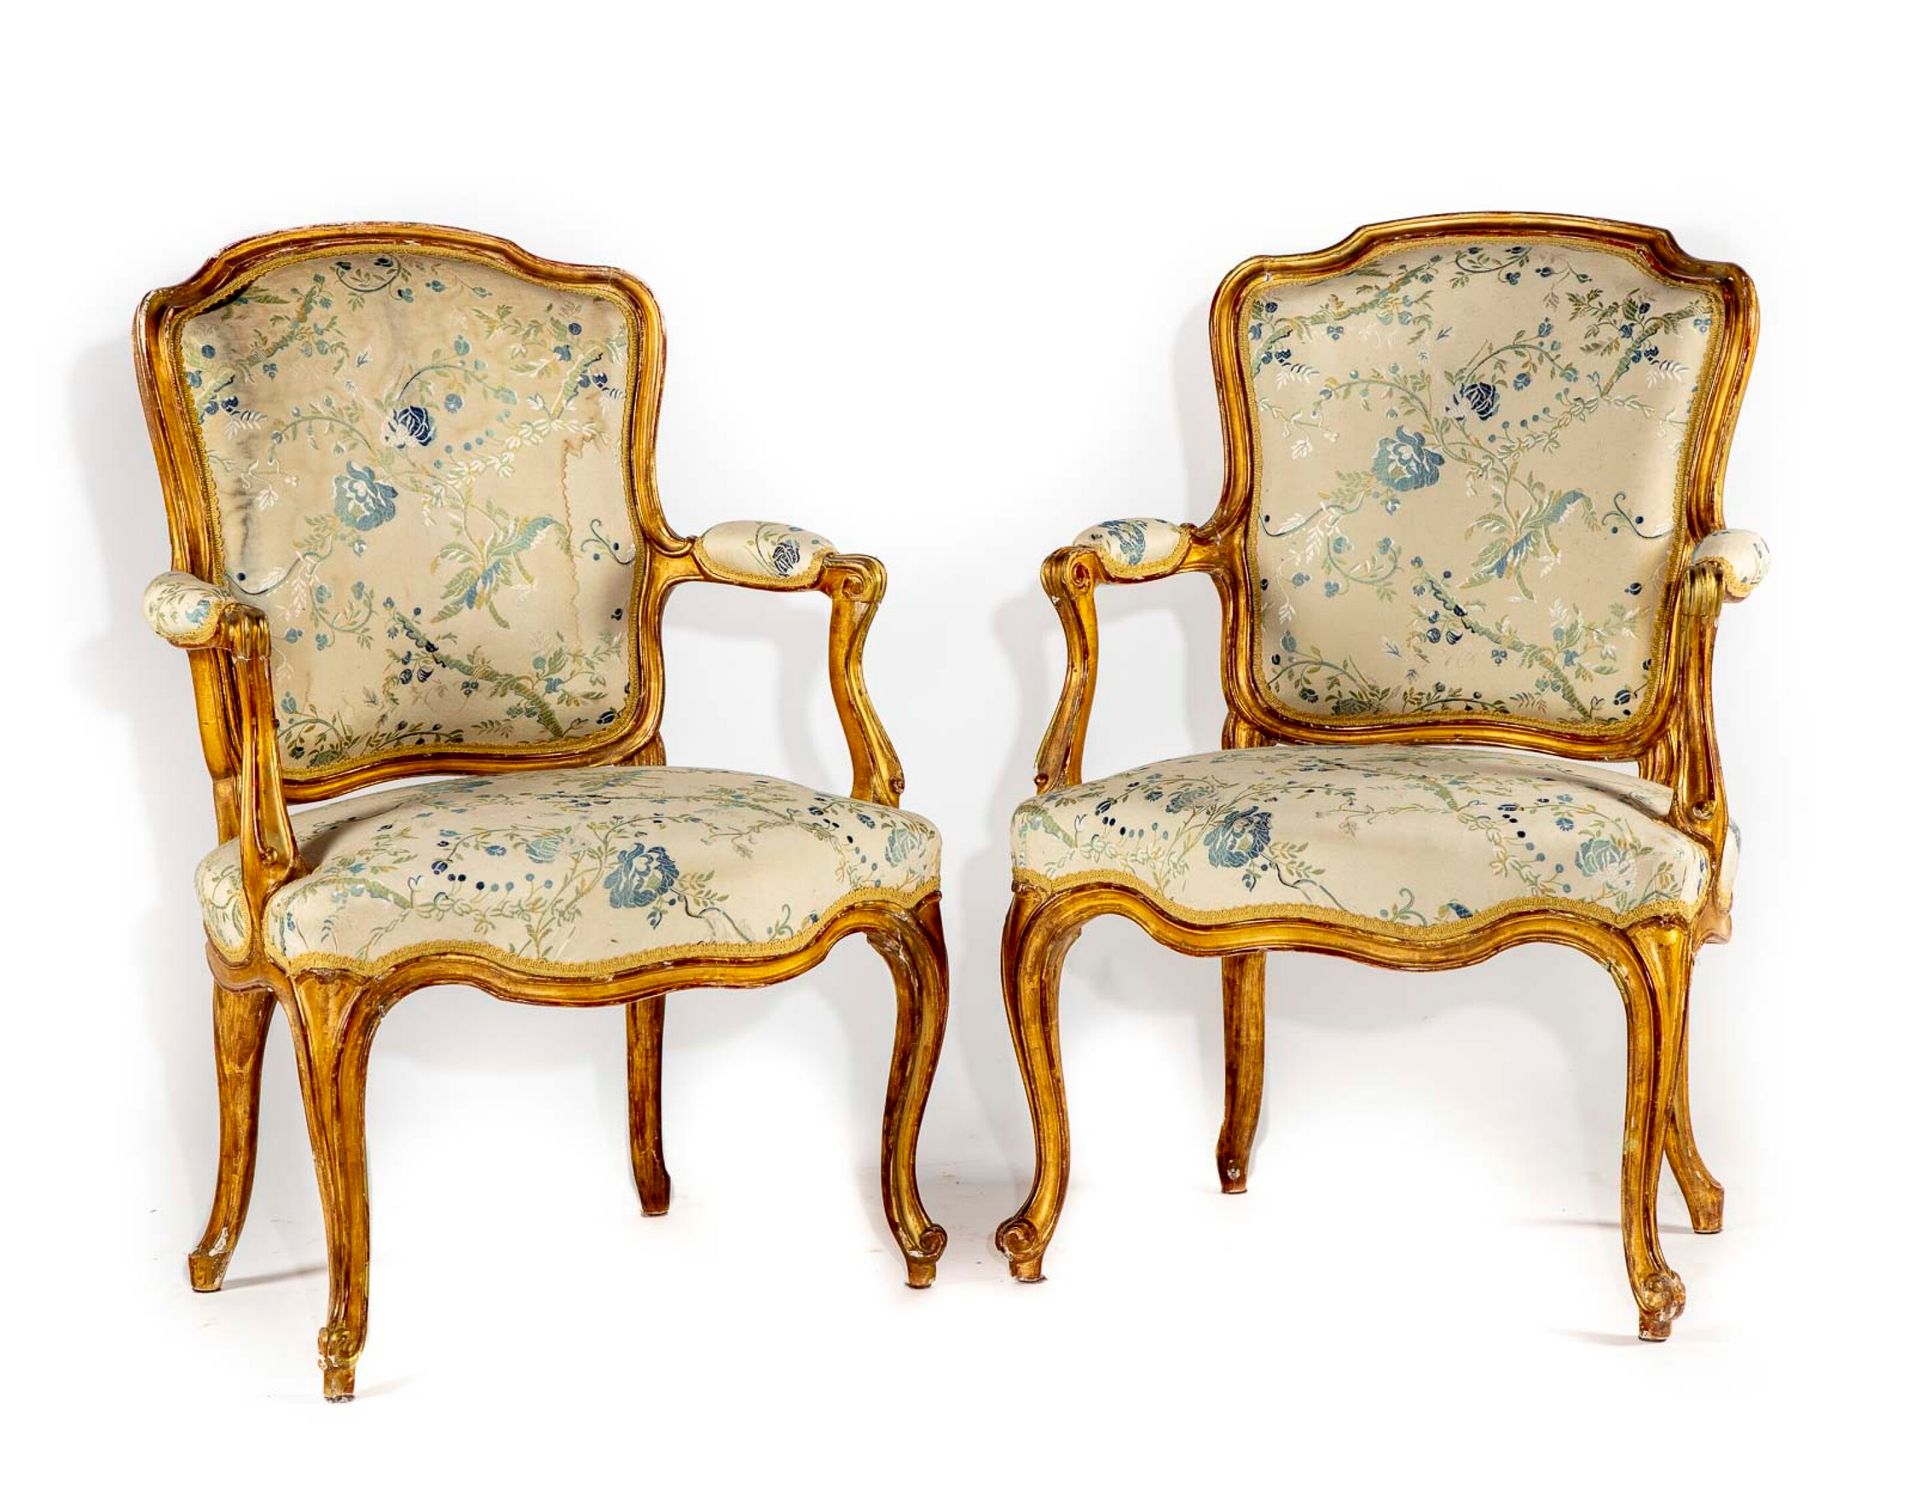 Null Pair of gilded wood armchairs with cabriolet backs, resting on curved legs
&hellip;